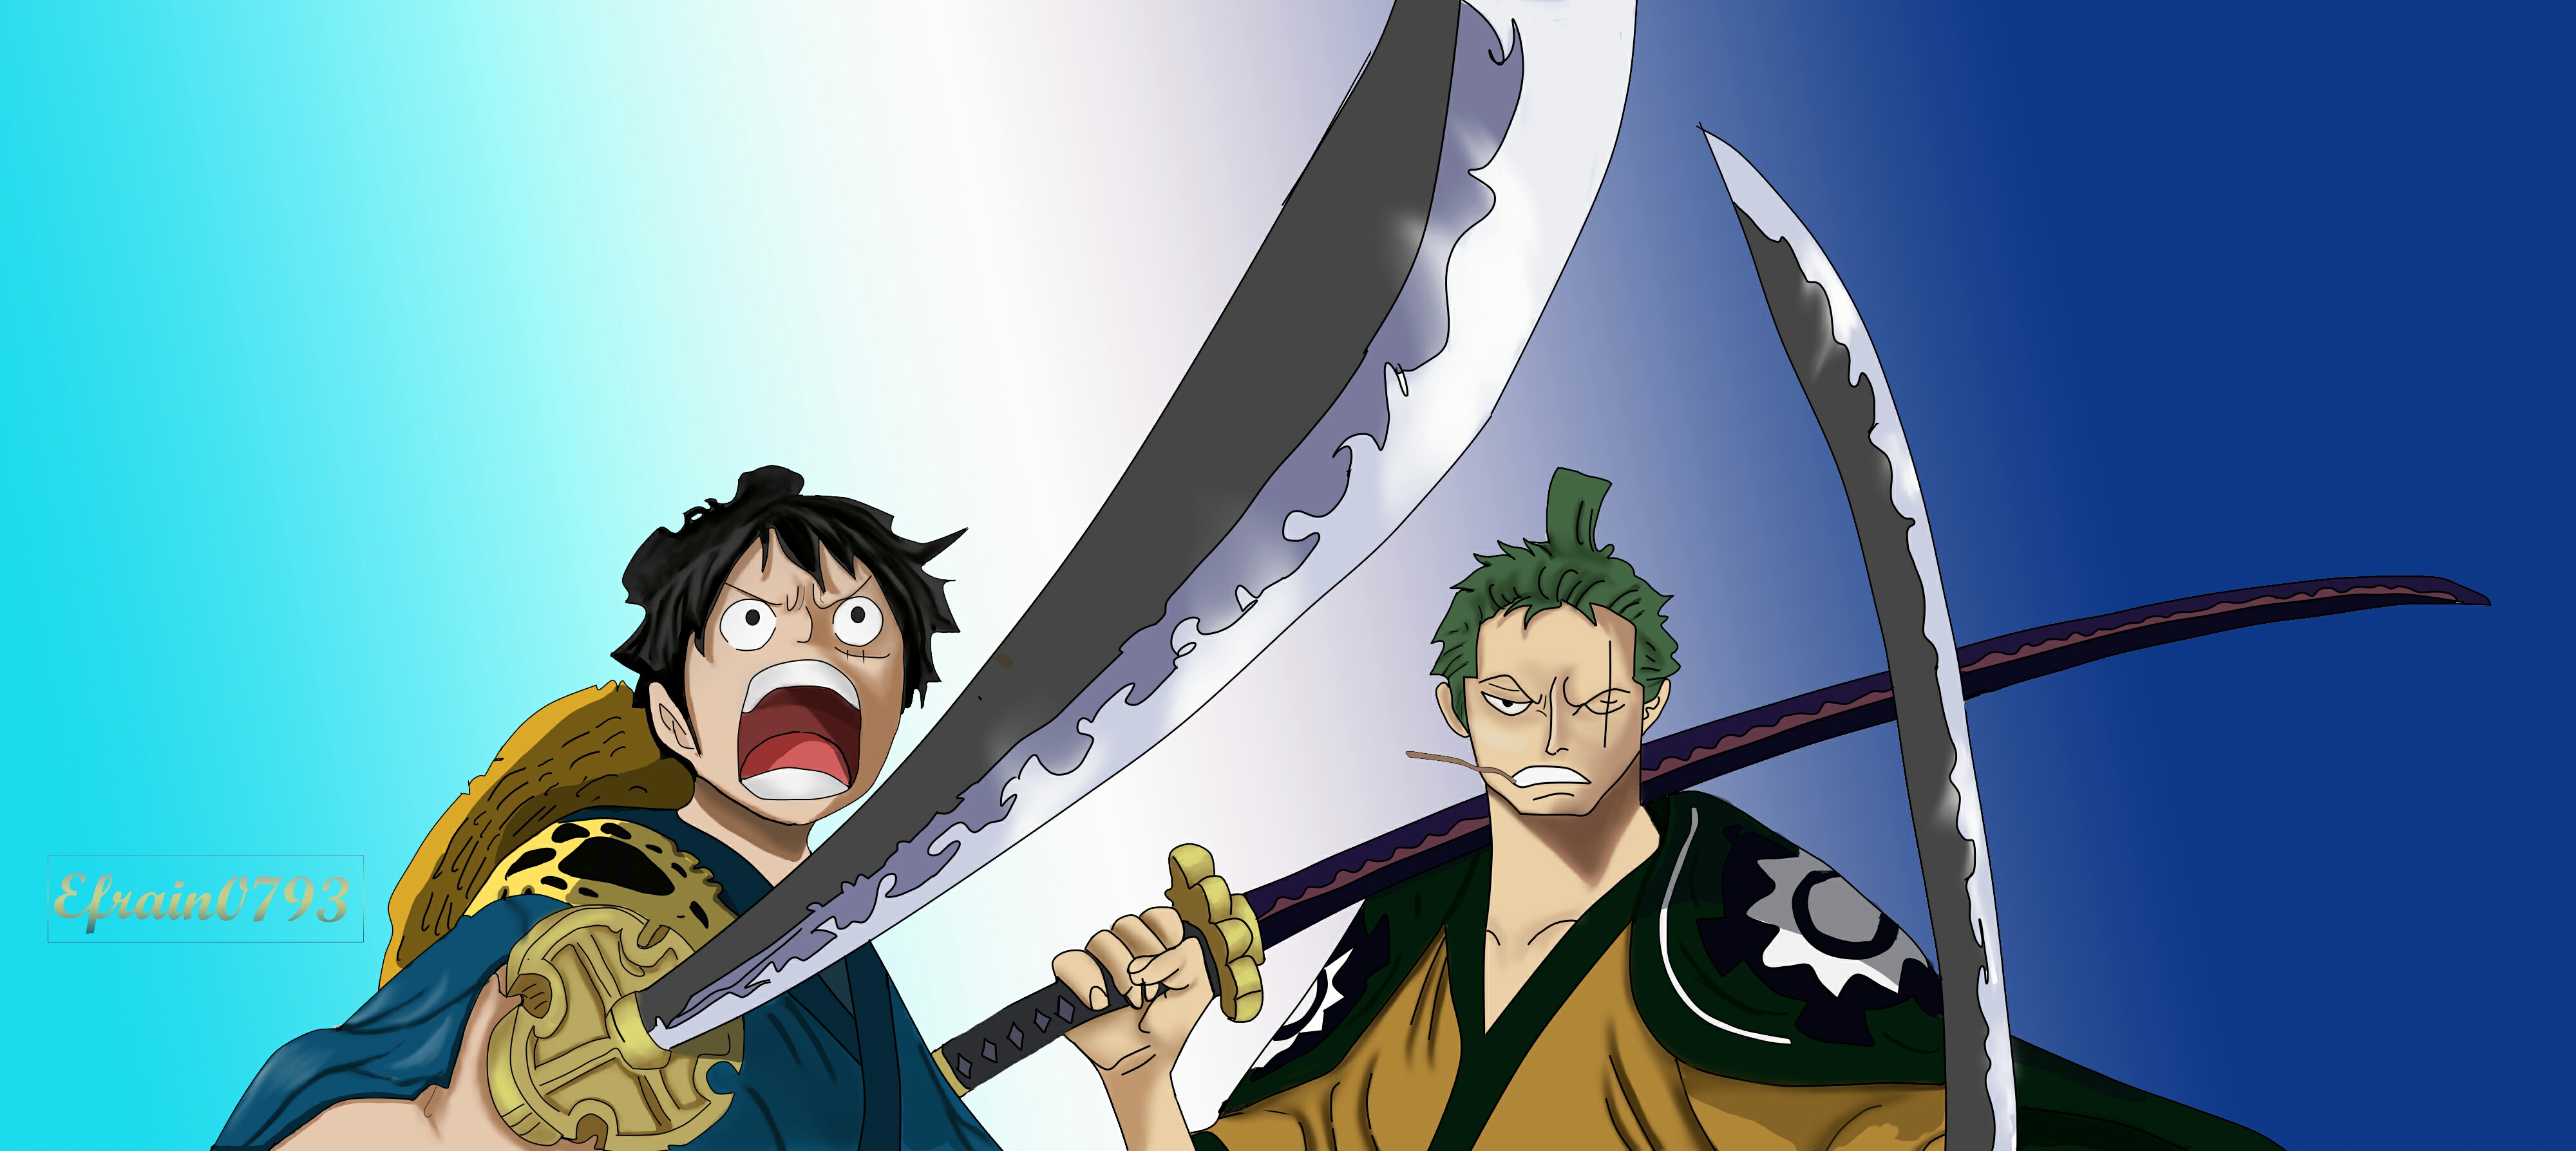 Luffy X Zoro Wallpapers - Wallpaper Cave